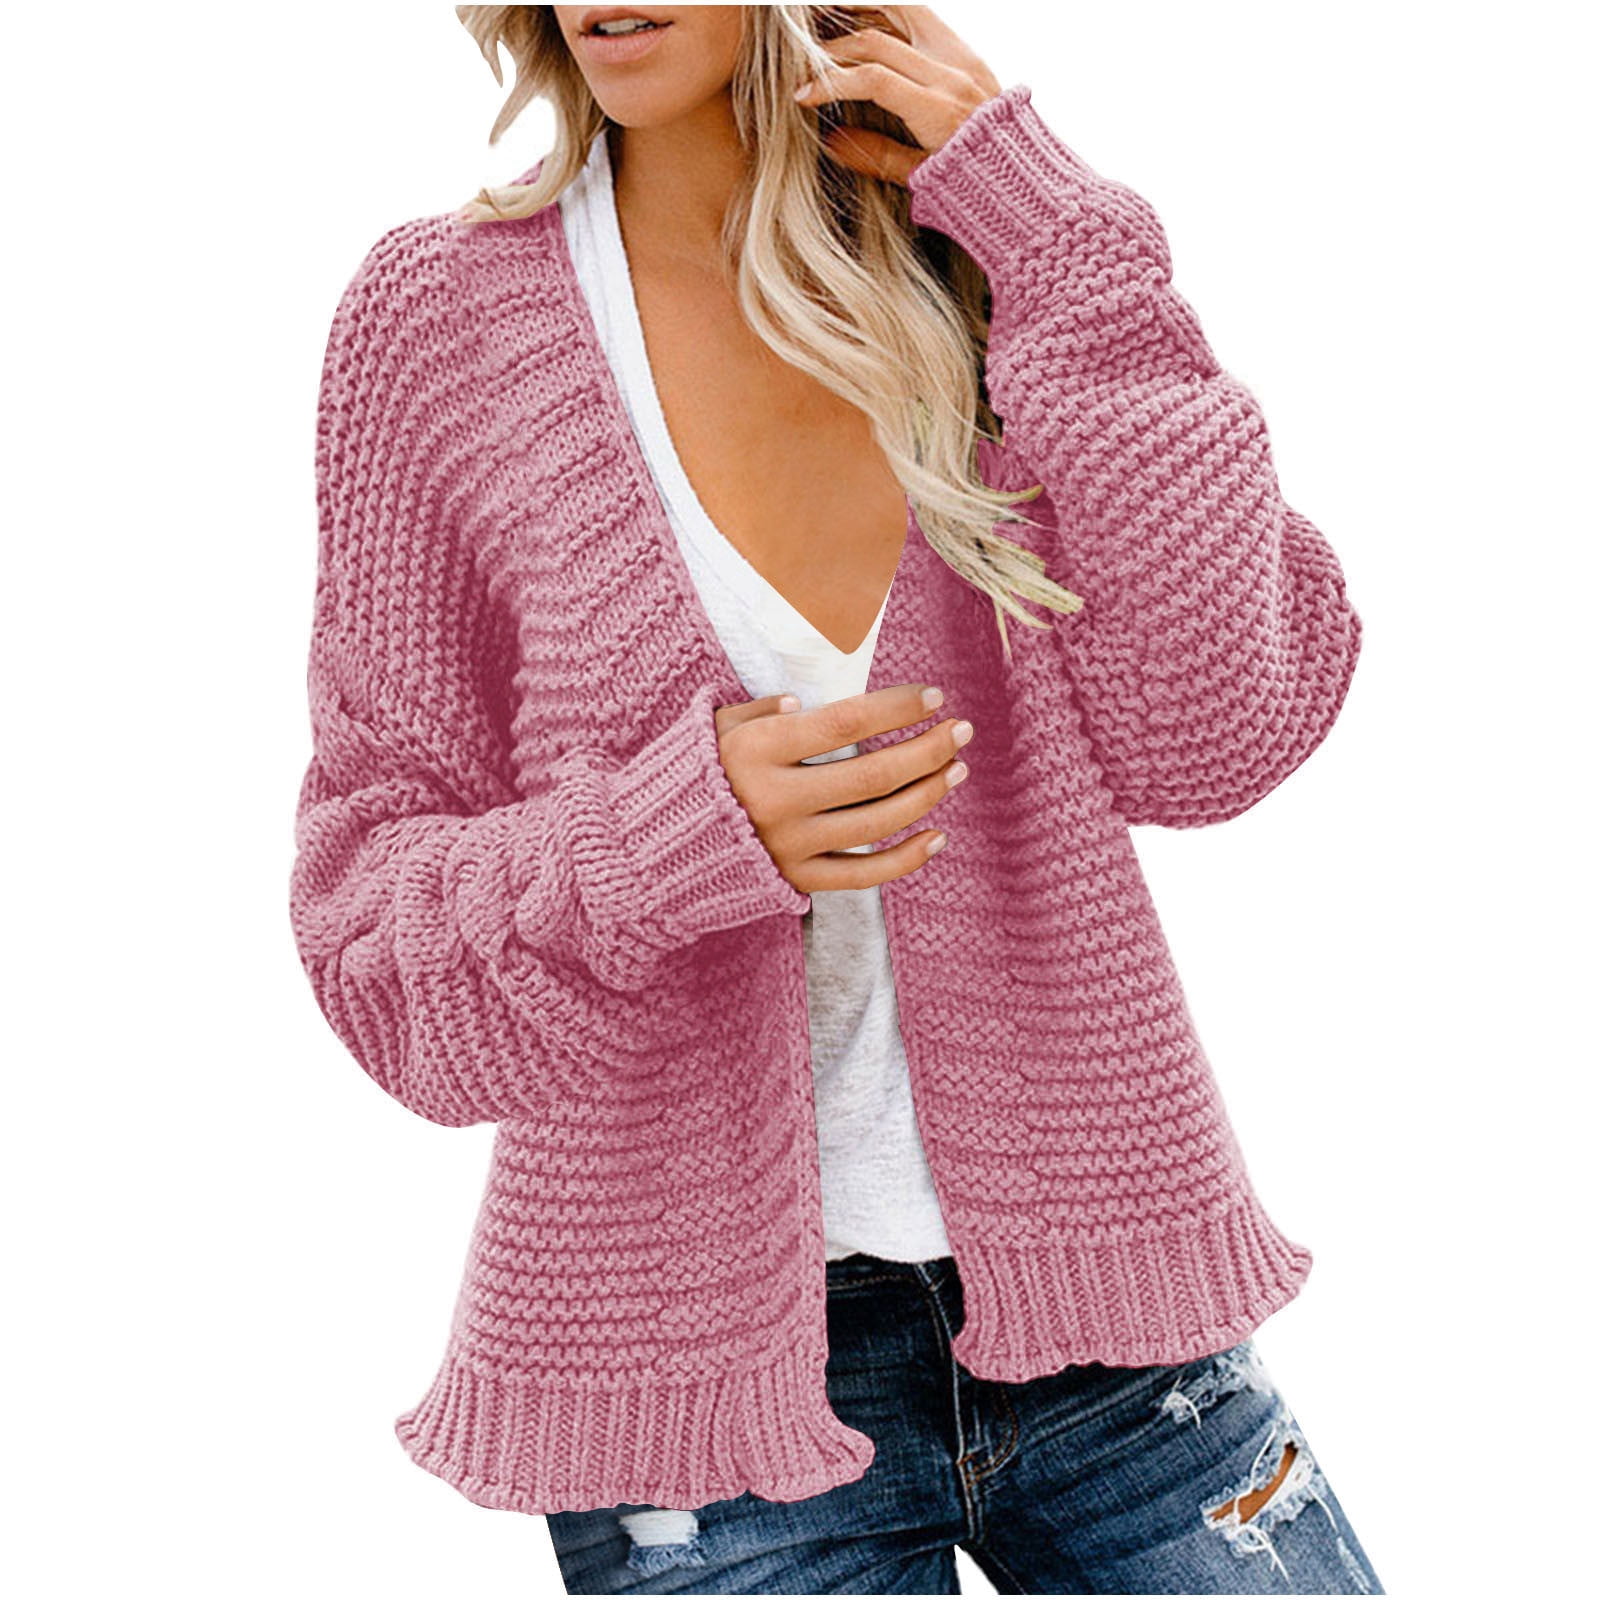 XFLWAM Womens Chunky Cardigan Cable Knit Sweater Oversized Open Front ...